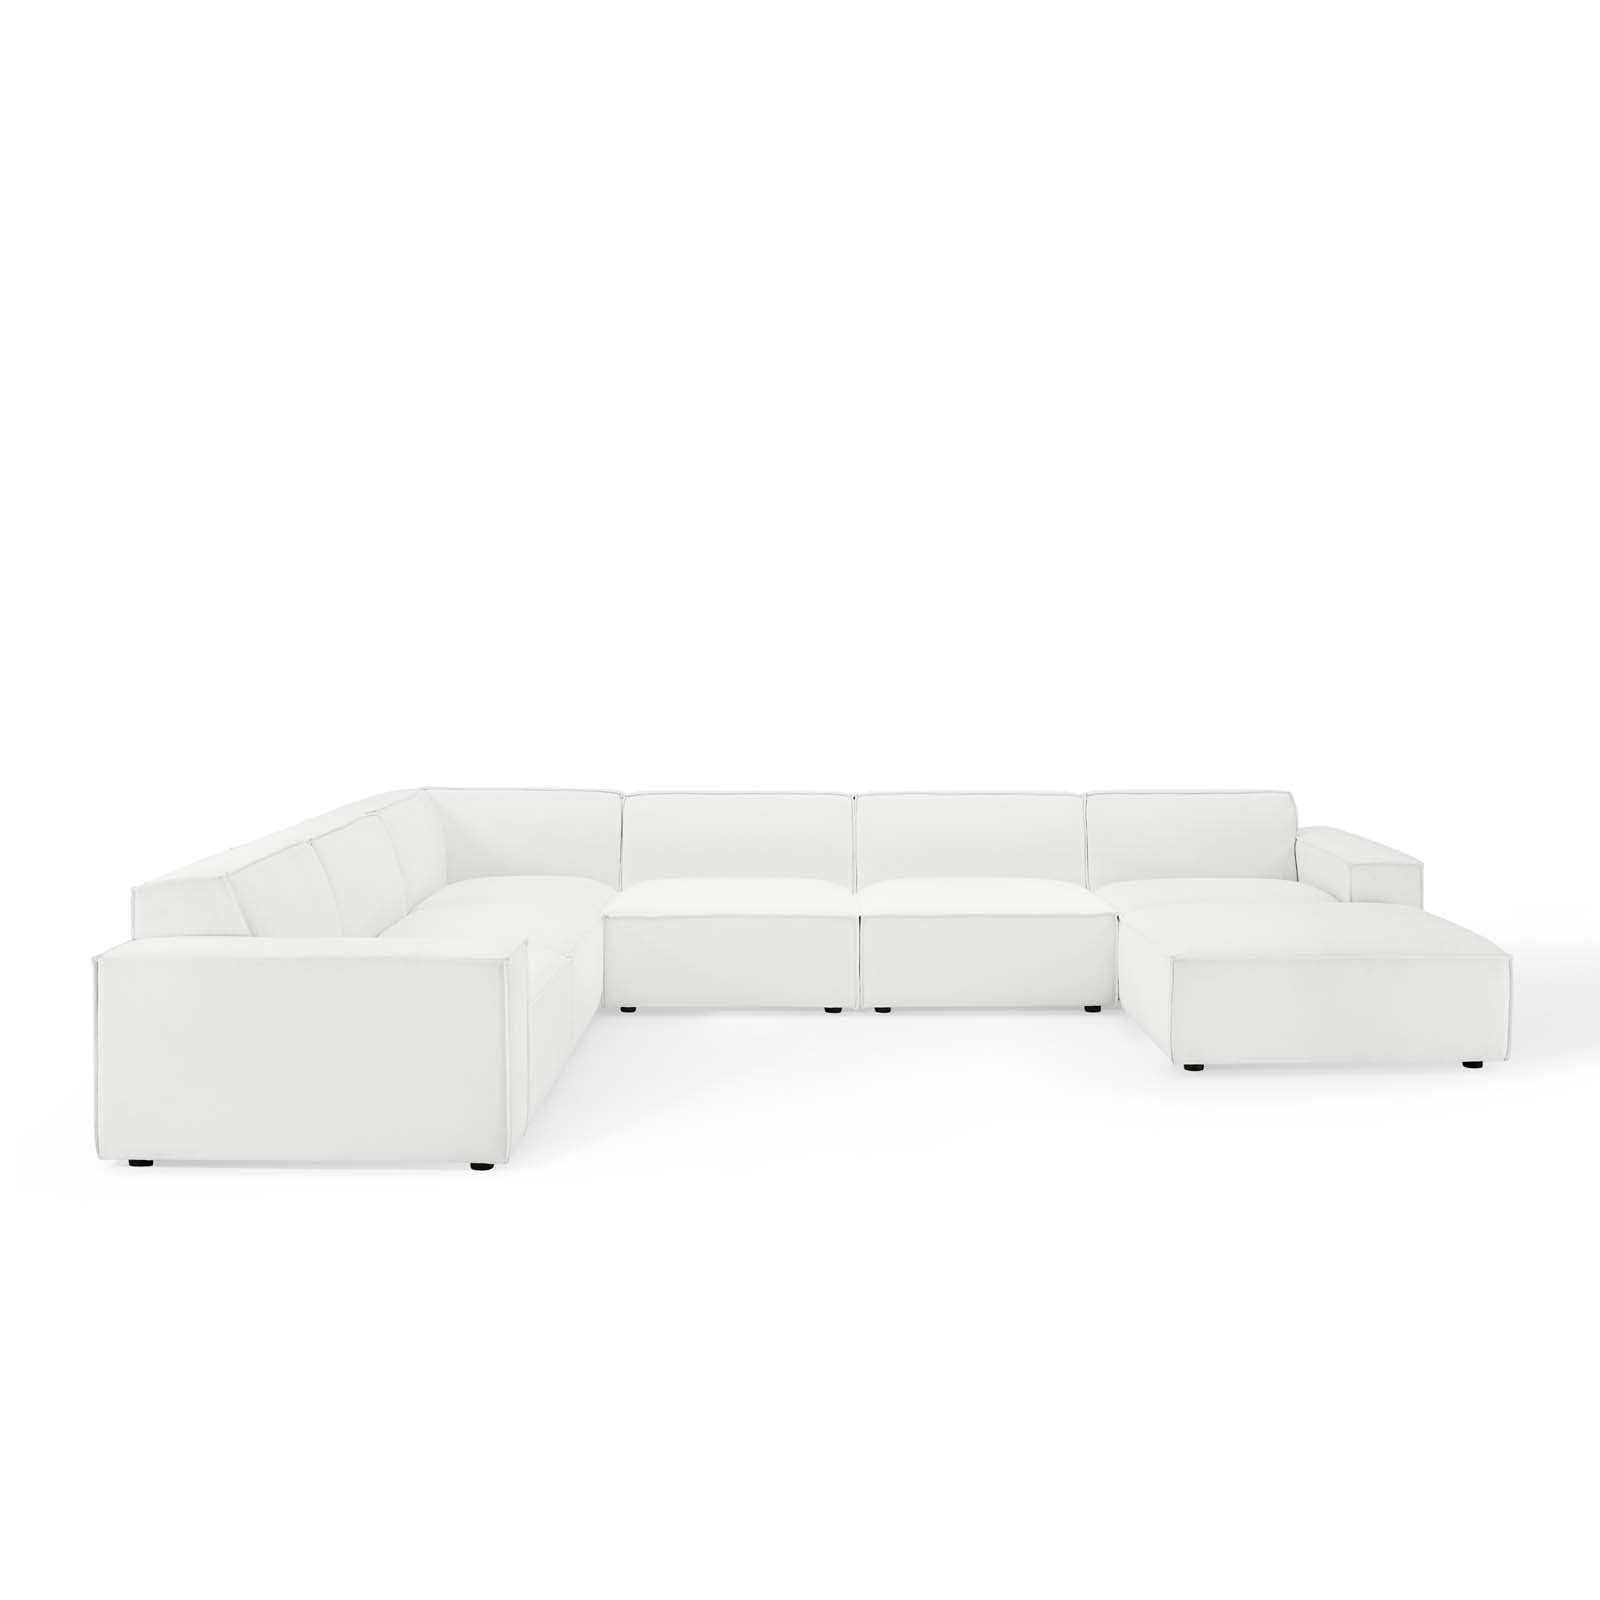 Modway Sectional Sofas - Restore 7-Piece Sectional Sofa White